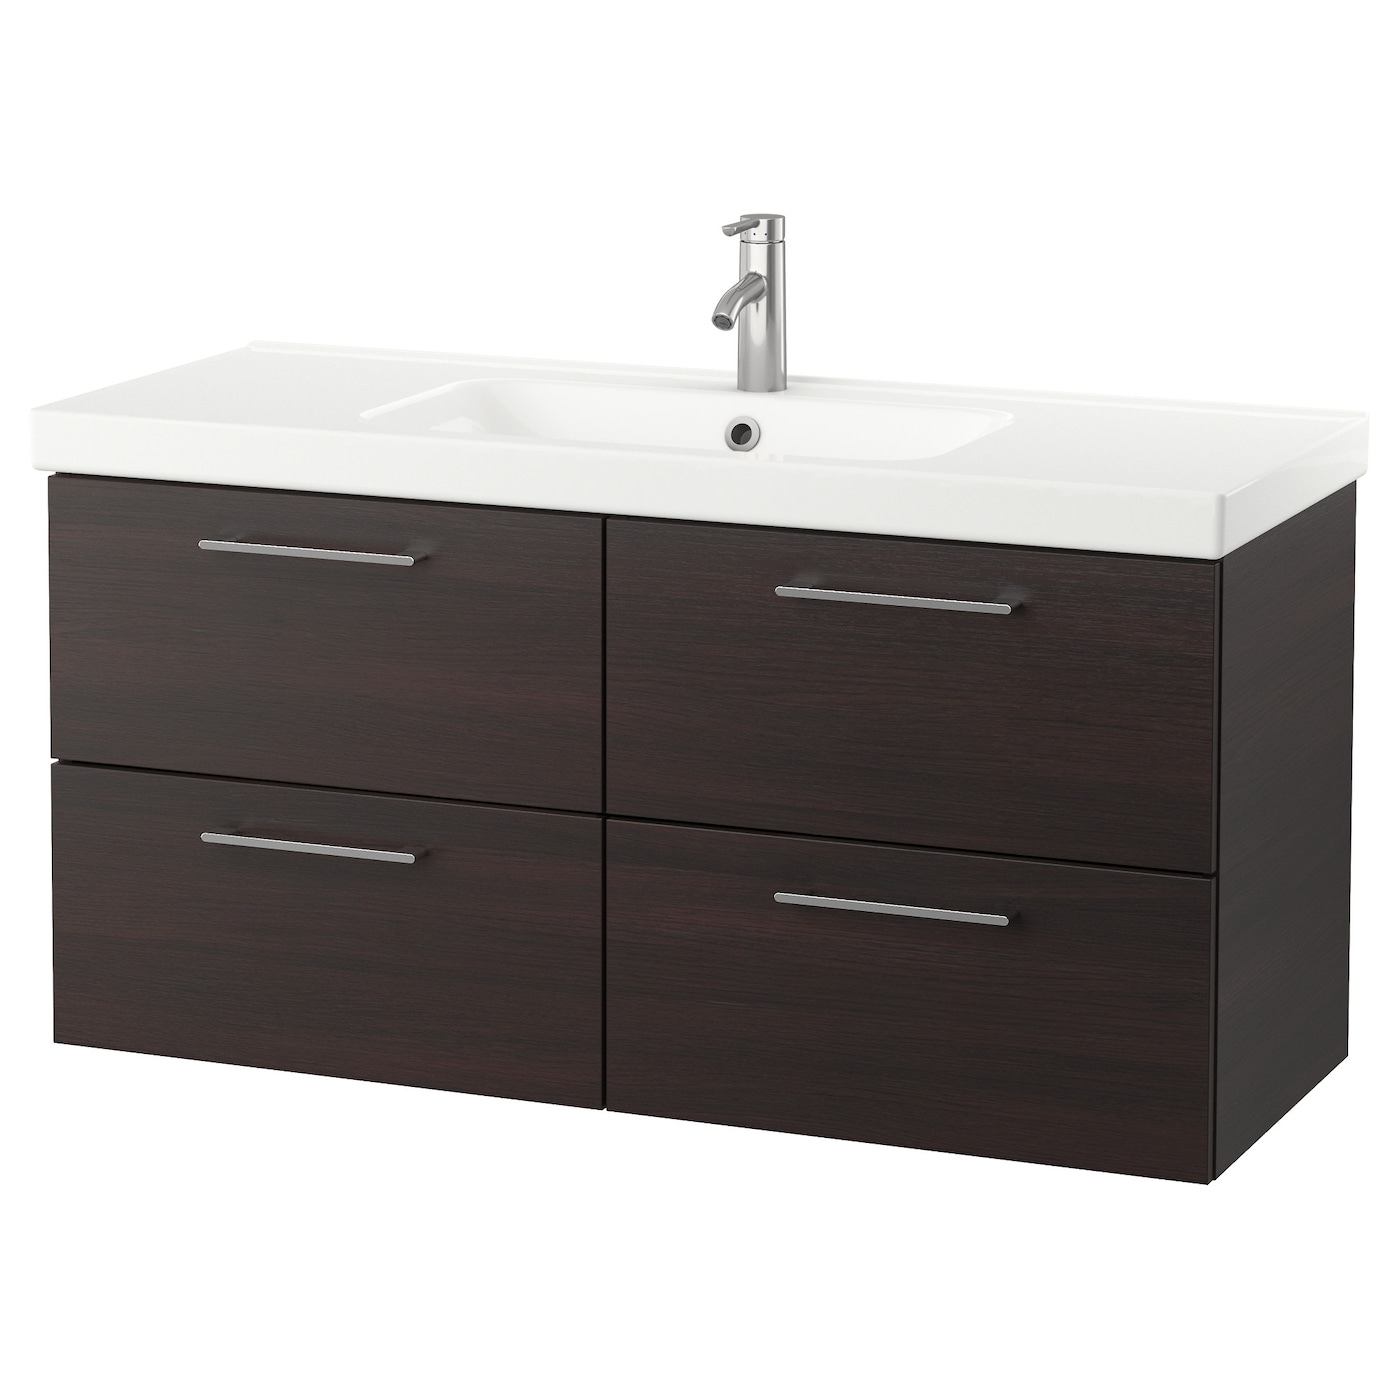 godmorgon odensvik wash stand with 4 drawers PE S5 JPG